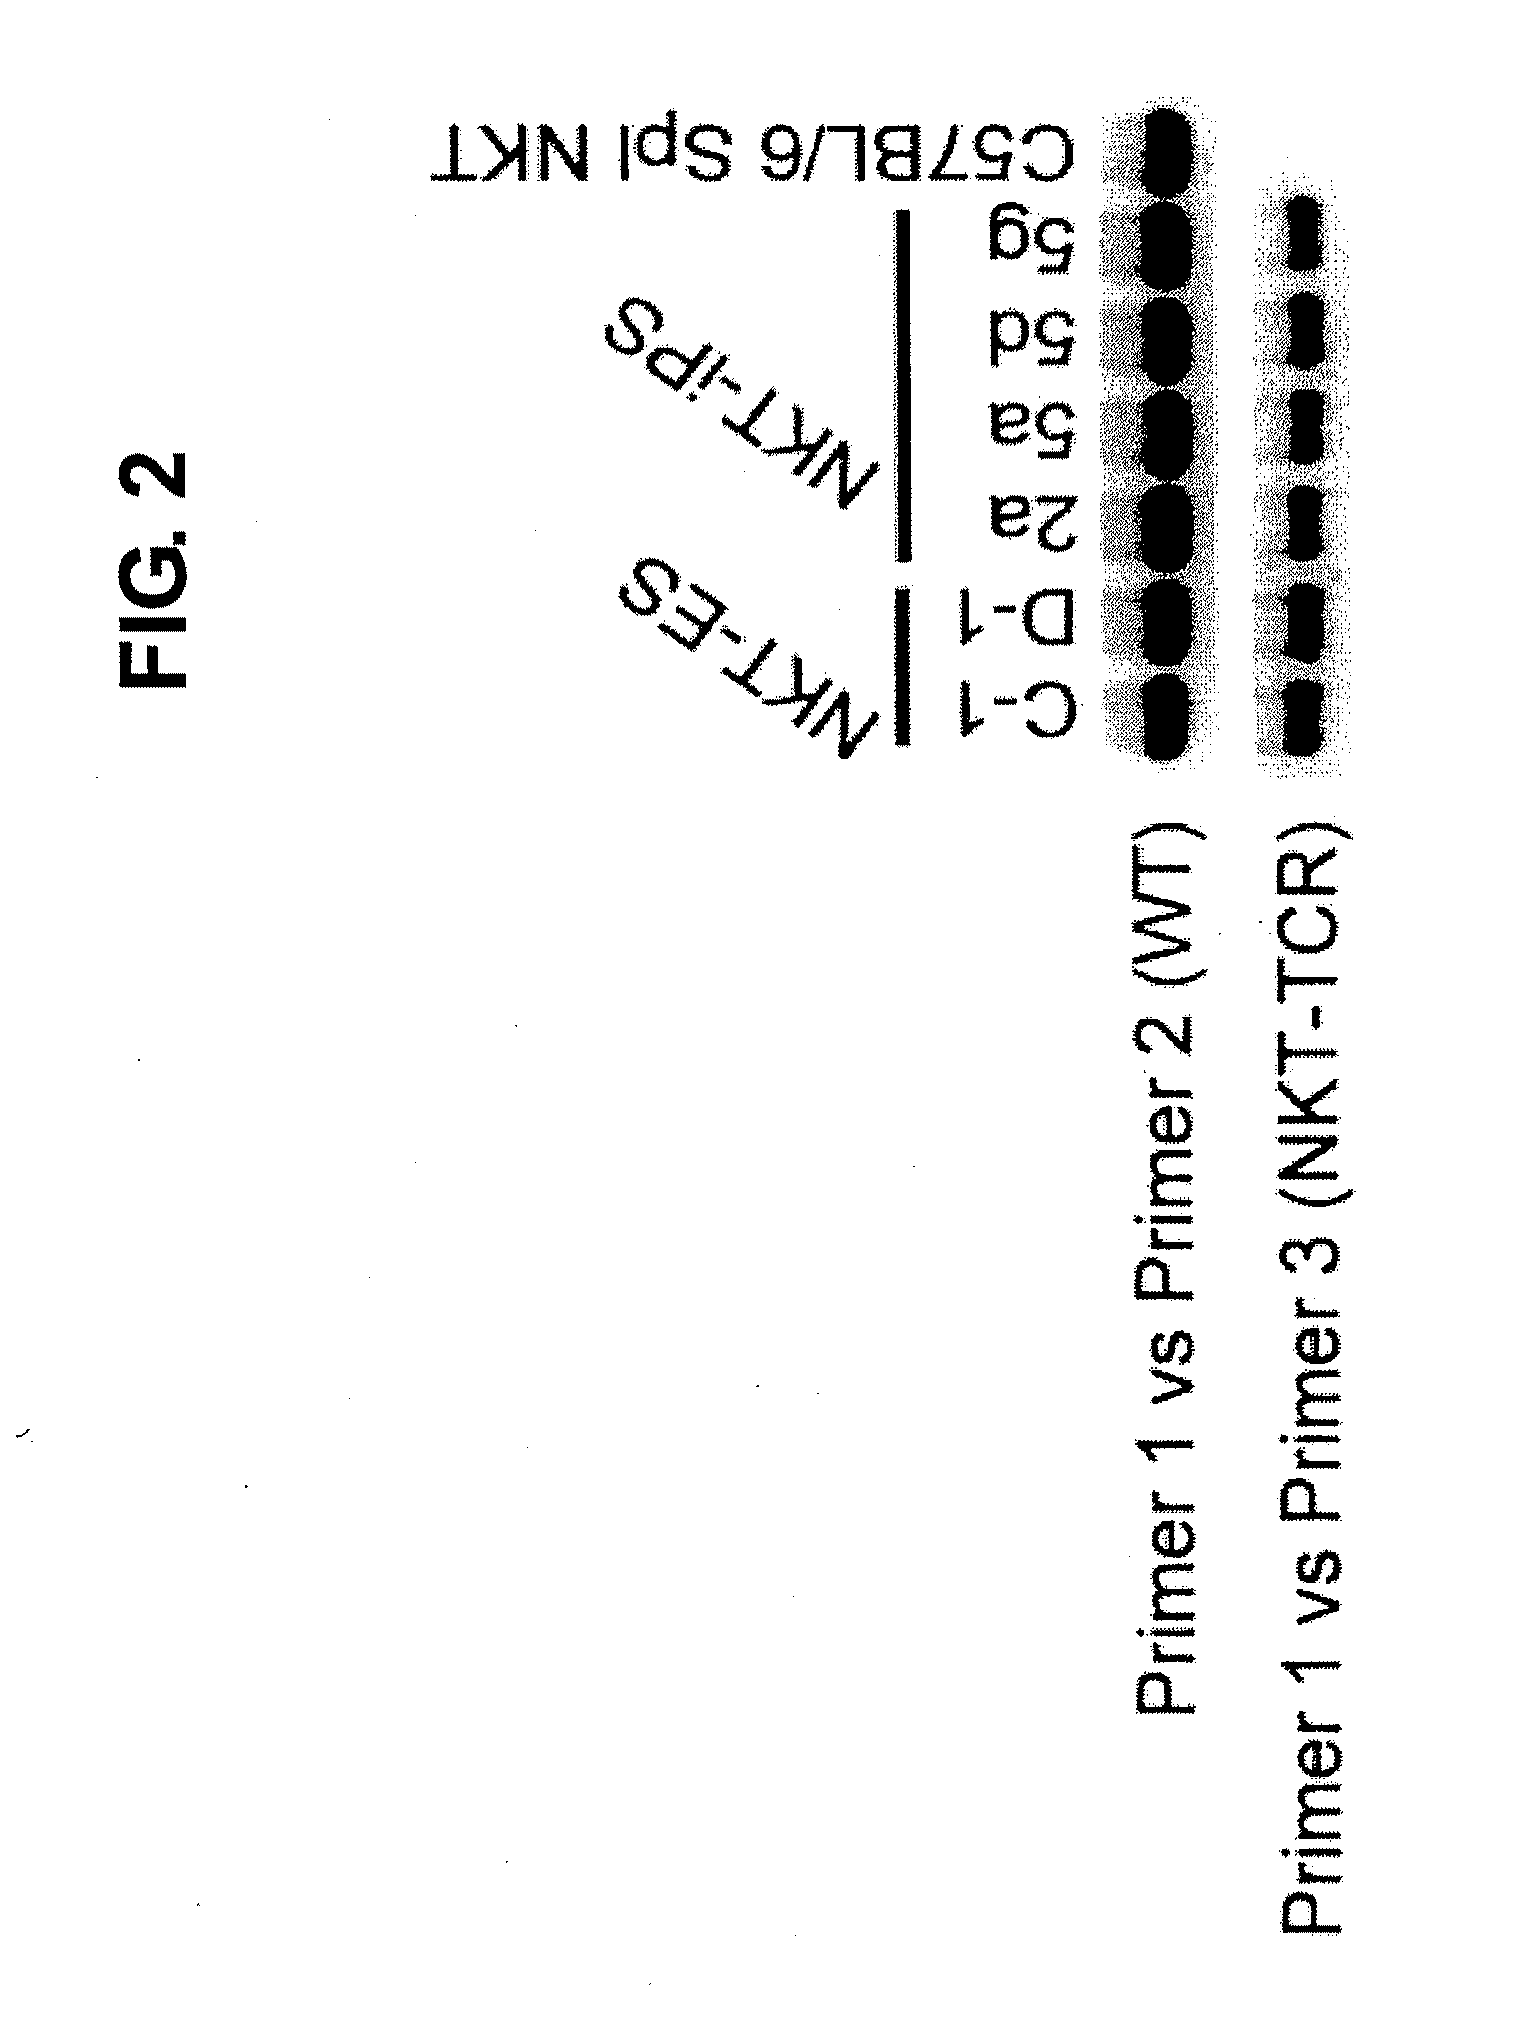 NKT CELL-DERIVED iPS CELLS AND NKT CELLS DERIVED THEREFROM